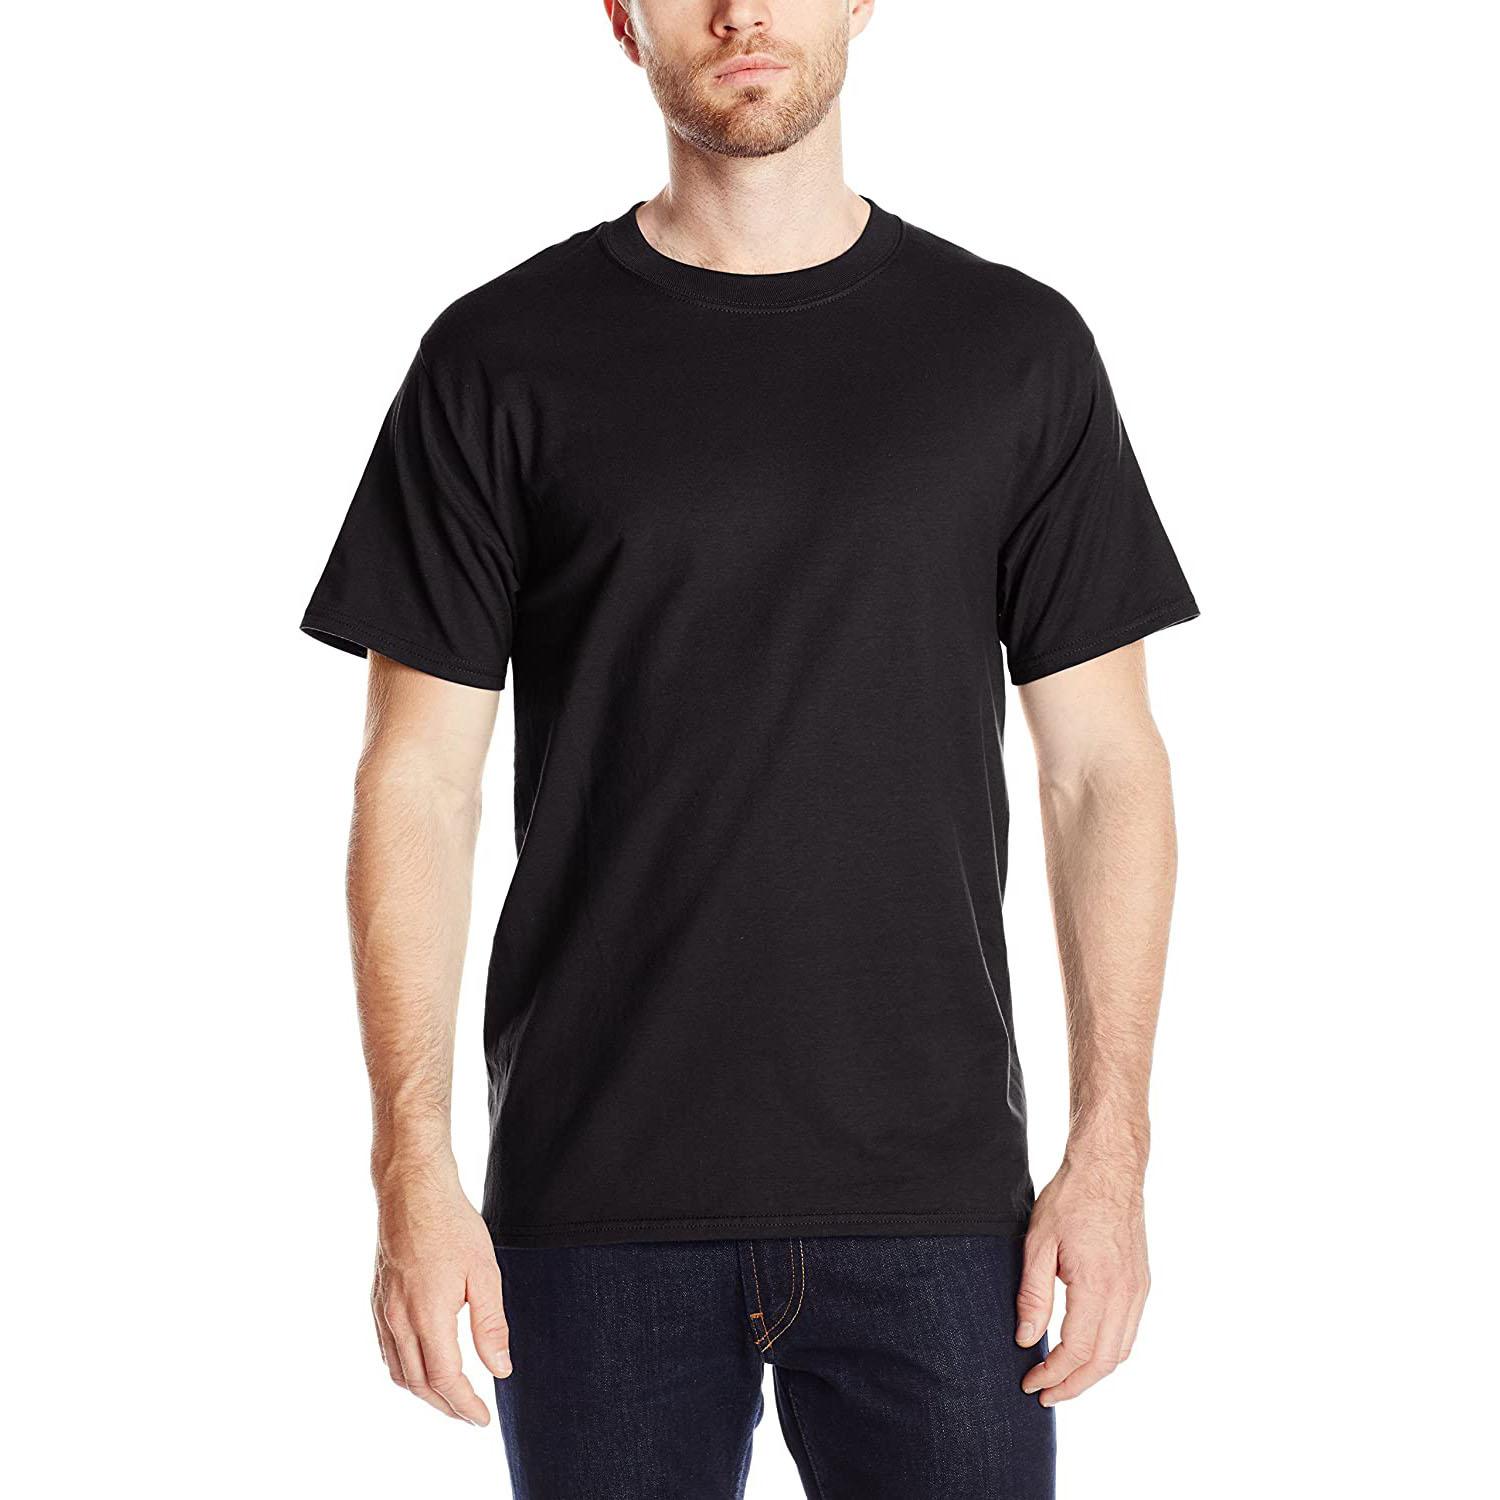 Hanes Mens Short Sleeve Beefy-T Shirt for $3.99